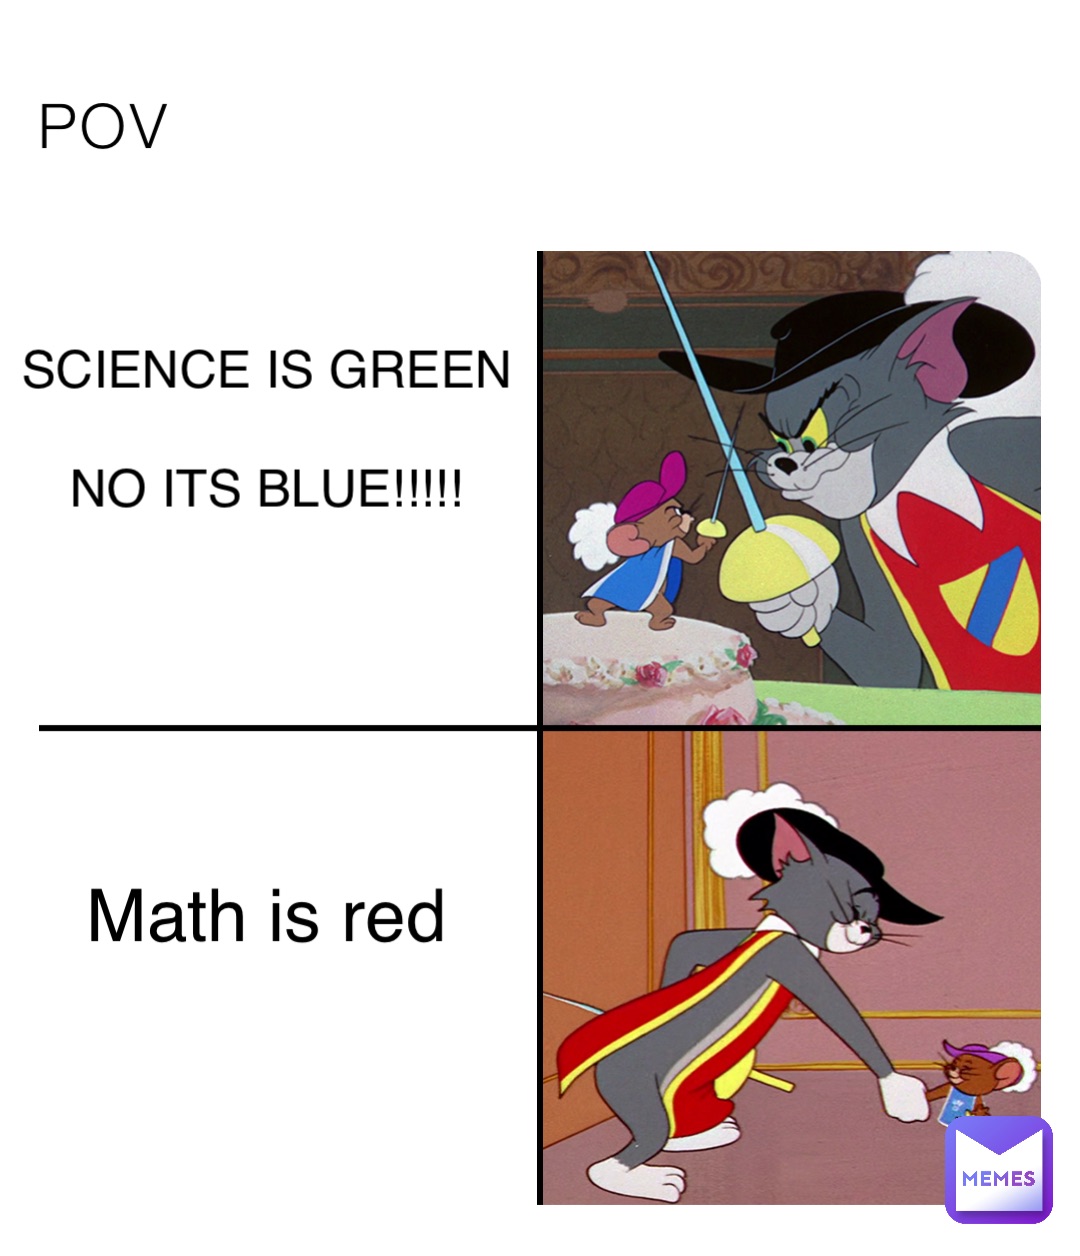 POV SCIENCE IS GREEN 

NO ITS BLUE!!!!! Math is red